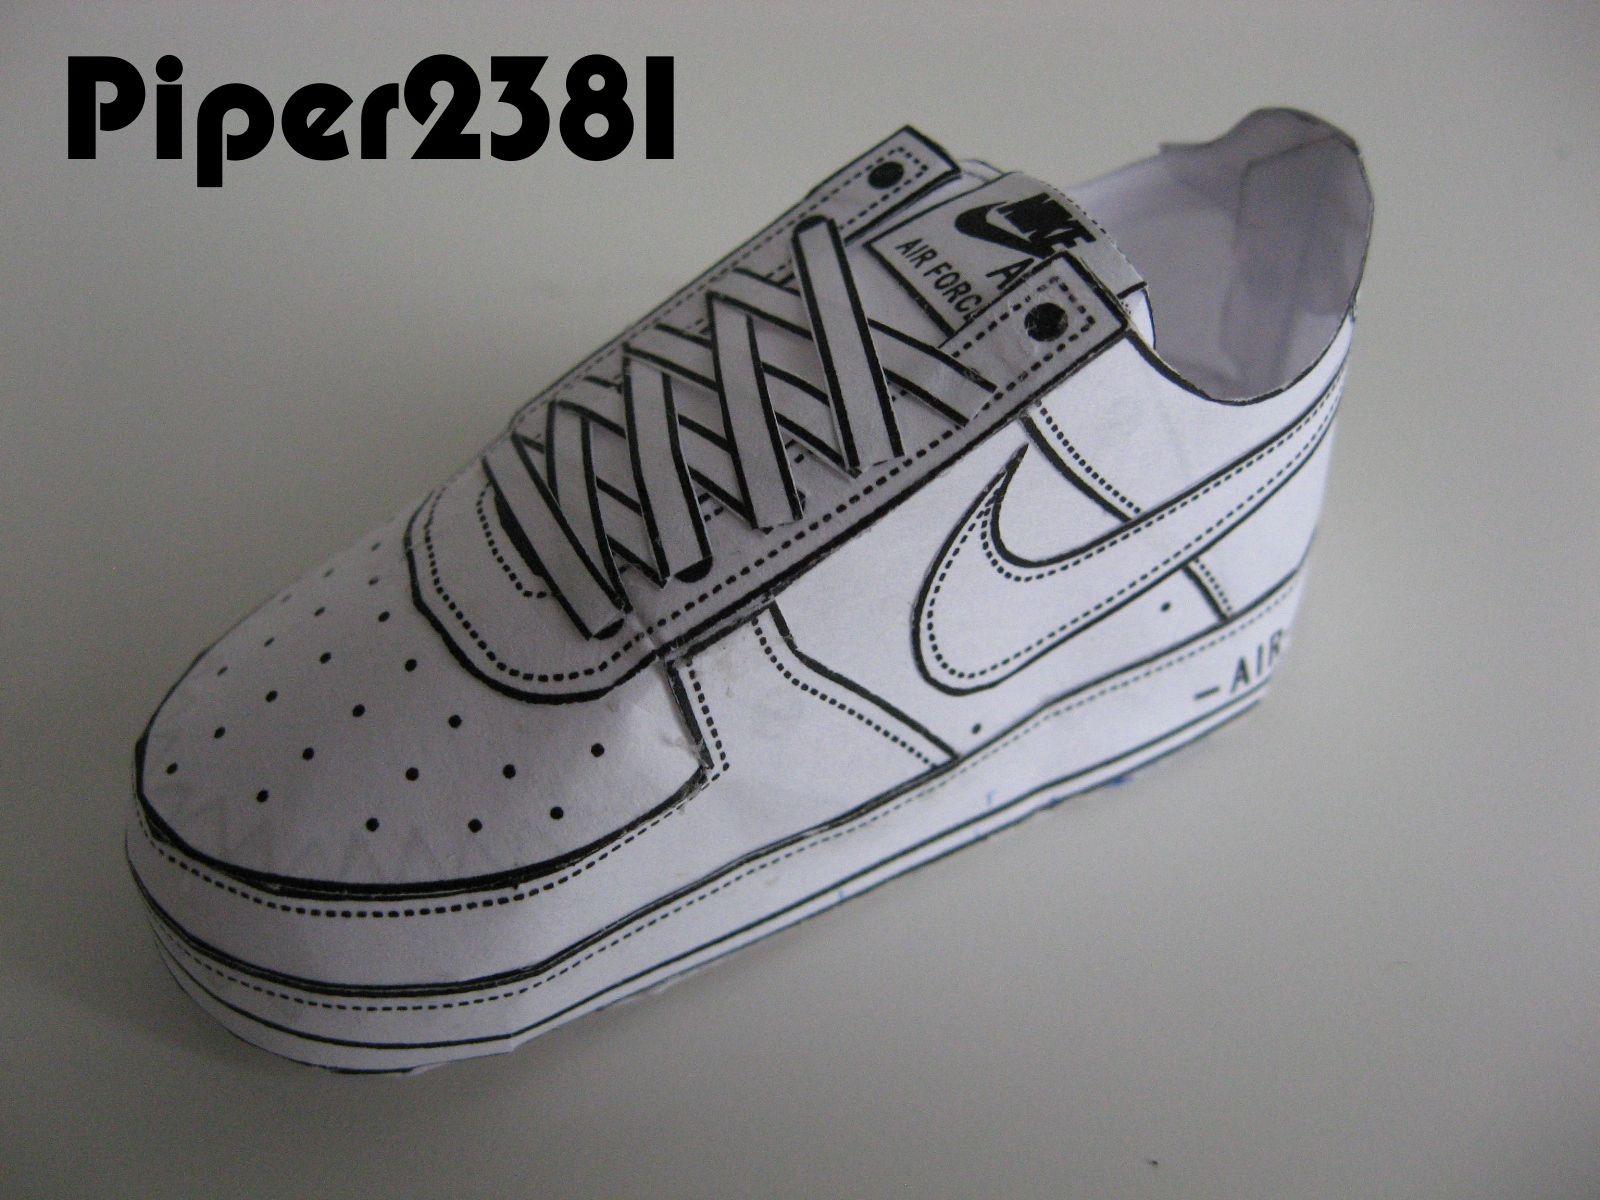 Piper2381: Nike Air Force 1 Papercraft